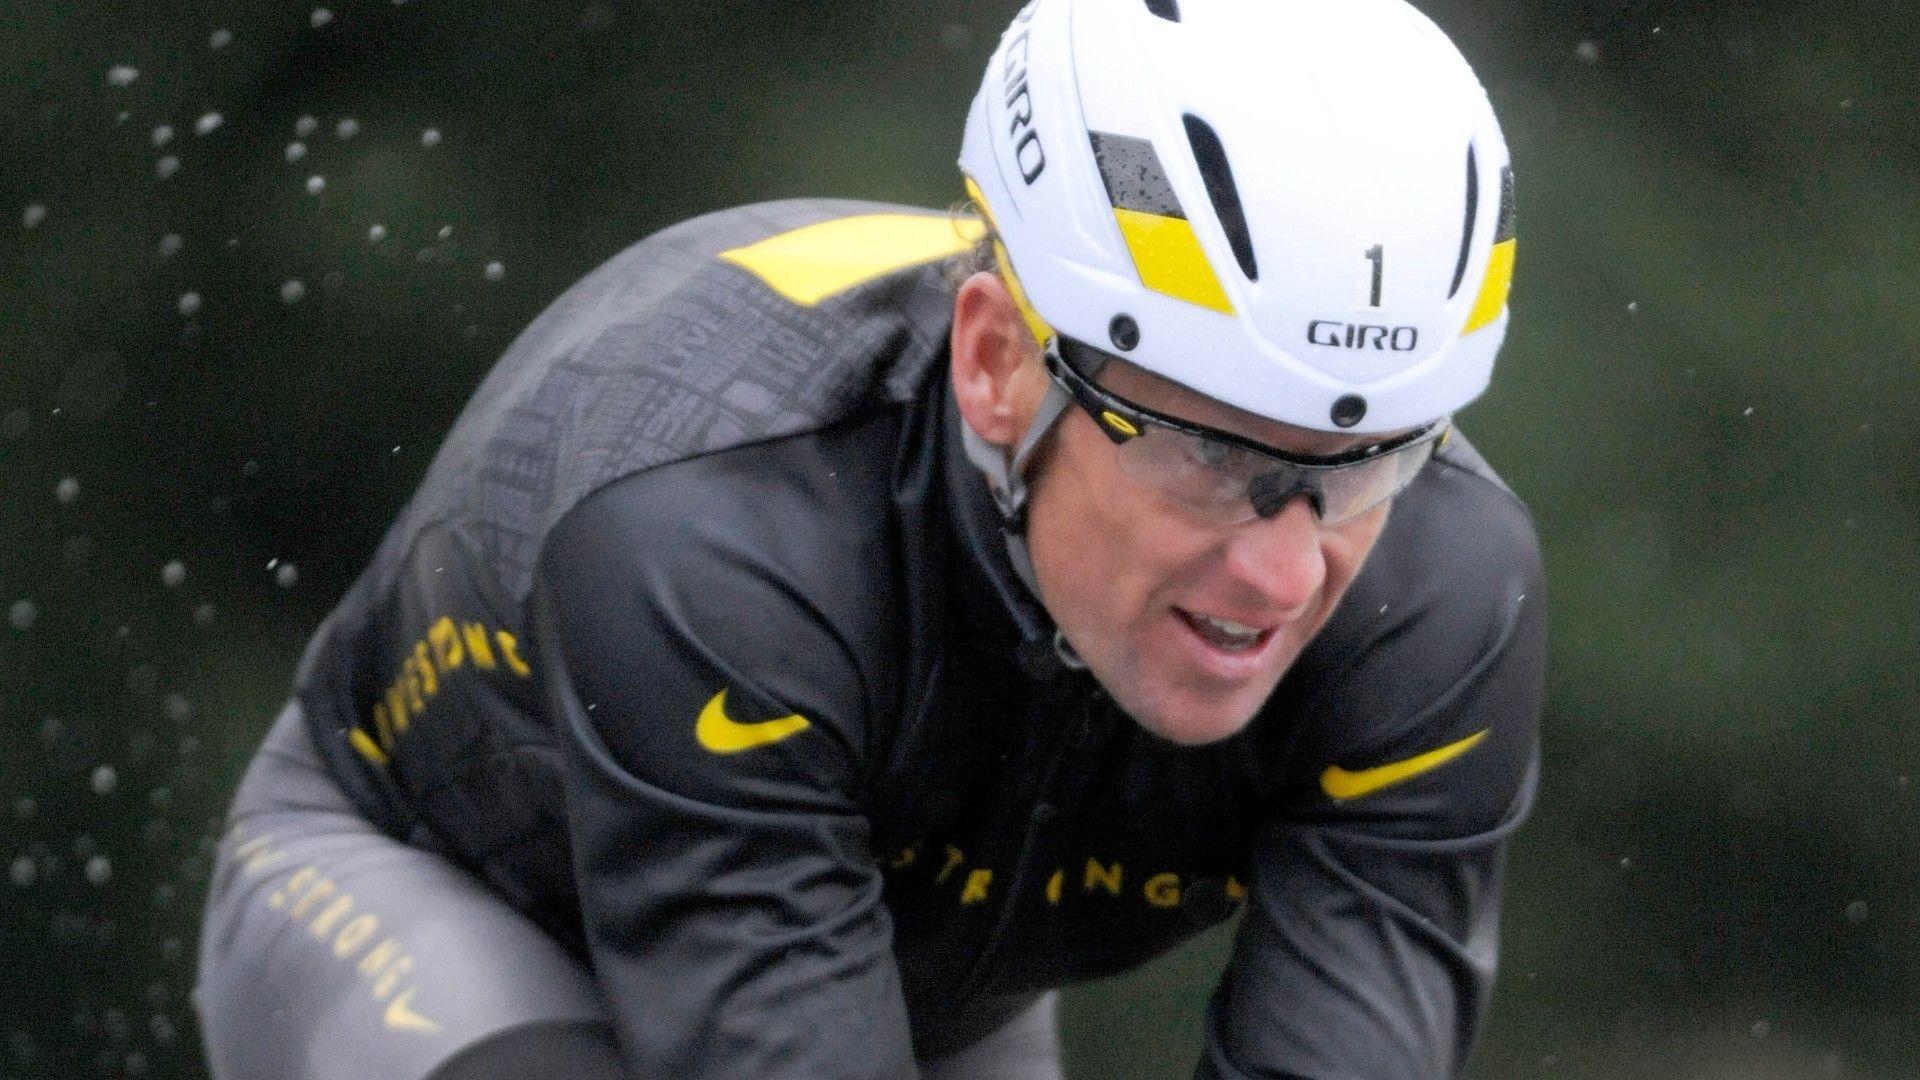 Lance Armstrong wallpaper in high quality 1080